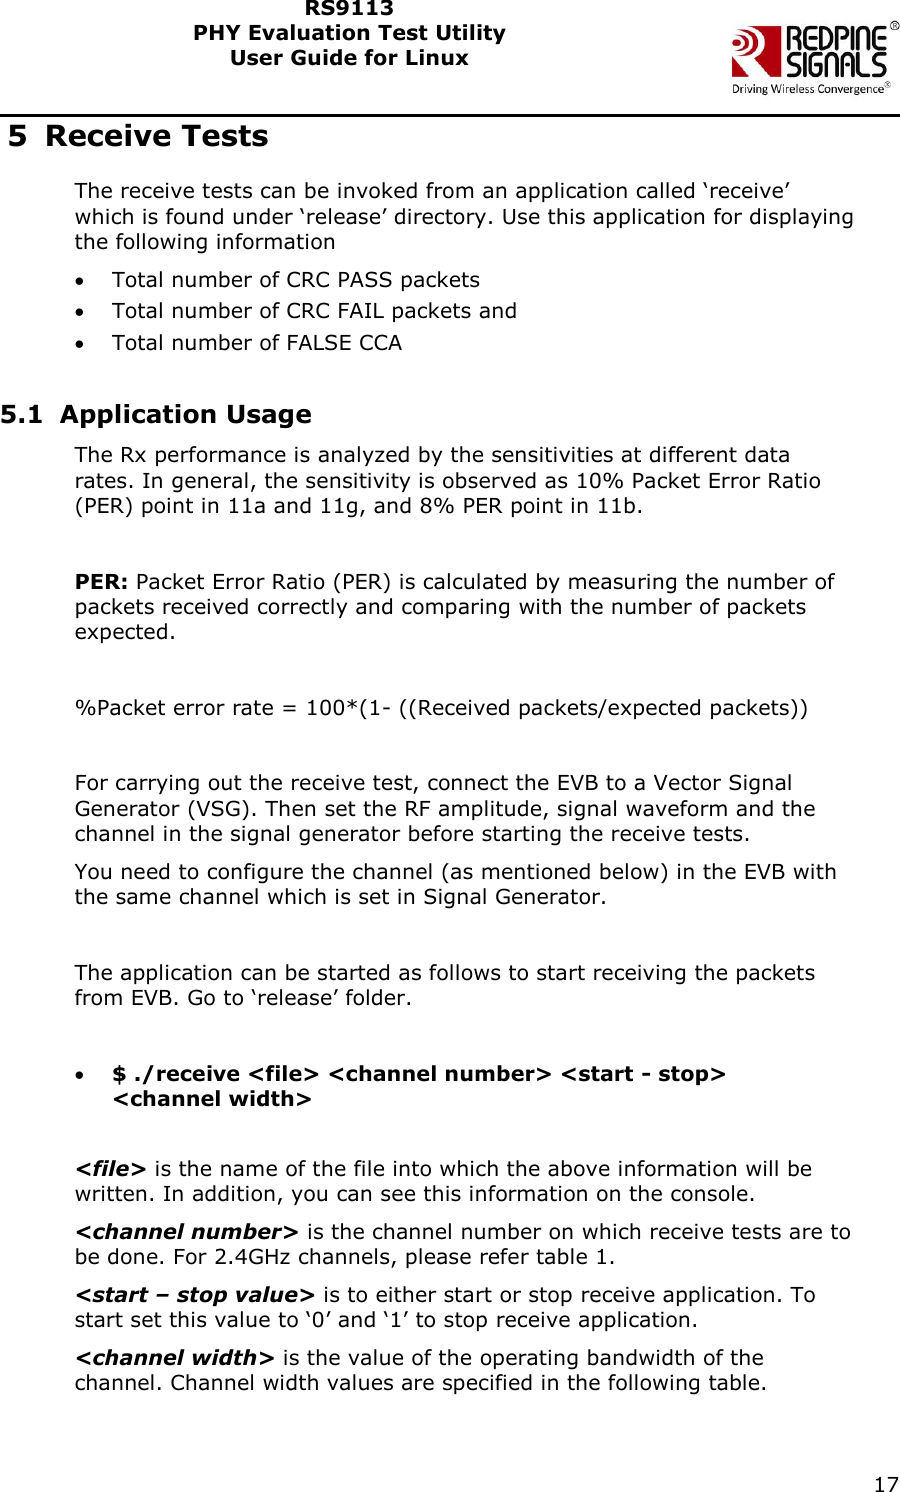    17  RS9113 PHY Evaluation Test Utility  User Guide for Linux  5 Receive Tests The receive tests can be invoked from an application called ‘receive’ which is found under ‘release’ directory. Use this application for displaying the following information  Total number of CRC PASS packets   Total number of CRC FAIL packets and  Total number of FALSE CCA    5.1 Application Usage The Rx performance is analyzed by the sensitivities at different data rates. In general, the sensitivity is observed as 10% Packet Error Ratio (PER) point in 11a and 11g, and 8% PER point in 11b.   PER: Packet Error Ratio (PER) is calculated by measuring the number of packets received correctly and comparing with the number of packets expected.   %Packet error rate = 100*(1- ((Received packets/expected packets))  For carrying out the receive test, connect the EVB to a Vector Signal Generator (VSG). Then set the RF amplitude, signal waveform and the channel in the signal generator before starting the receive tests. You need to configure the channel (as mentioned below) in the EVB with the same channel which is set in Signal Generator.  The application can be started as follows to start receiving the packets from EVB. Go to ‘release’ folder.   $ ./receive &lt;file&gt; &lt;channel number&gt; &lt;start - stop&gt; &lt;channel width&gt;  &lt;file&gt; is the name of the file into which the above information will be written. In addition, you can see this information on the console. &lt;channel number&gt; is the channel number on which receive tests are to be done. For 2.4GHz channels, please refer table 1. &lt;start – stop value&gt; is to either start or stop receive application. To start set this value to ‘0’ and ‘1’ to stop receive application. &lt;channel width&gt; is the value of the operating bandwidth of the channel. Channel width values are specified in the following table.   